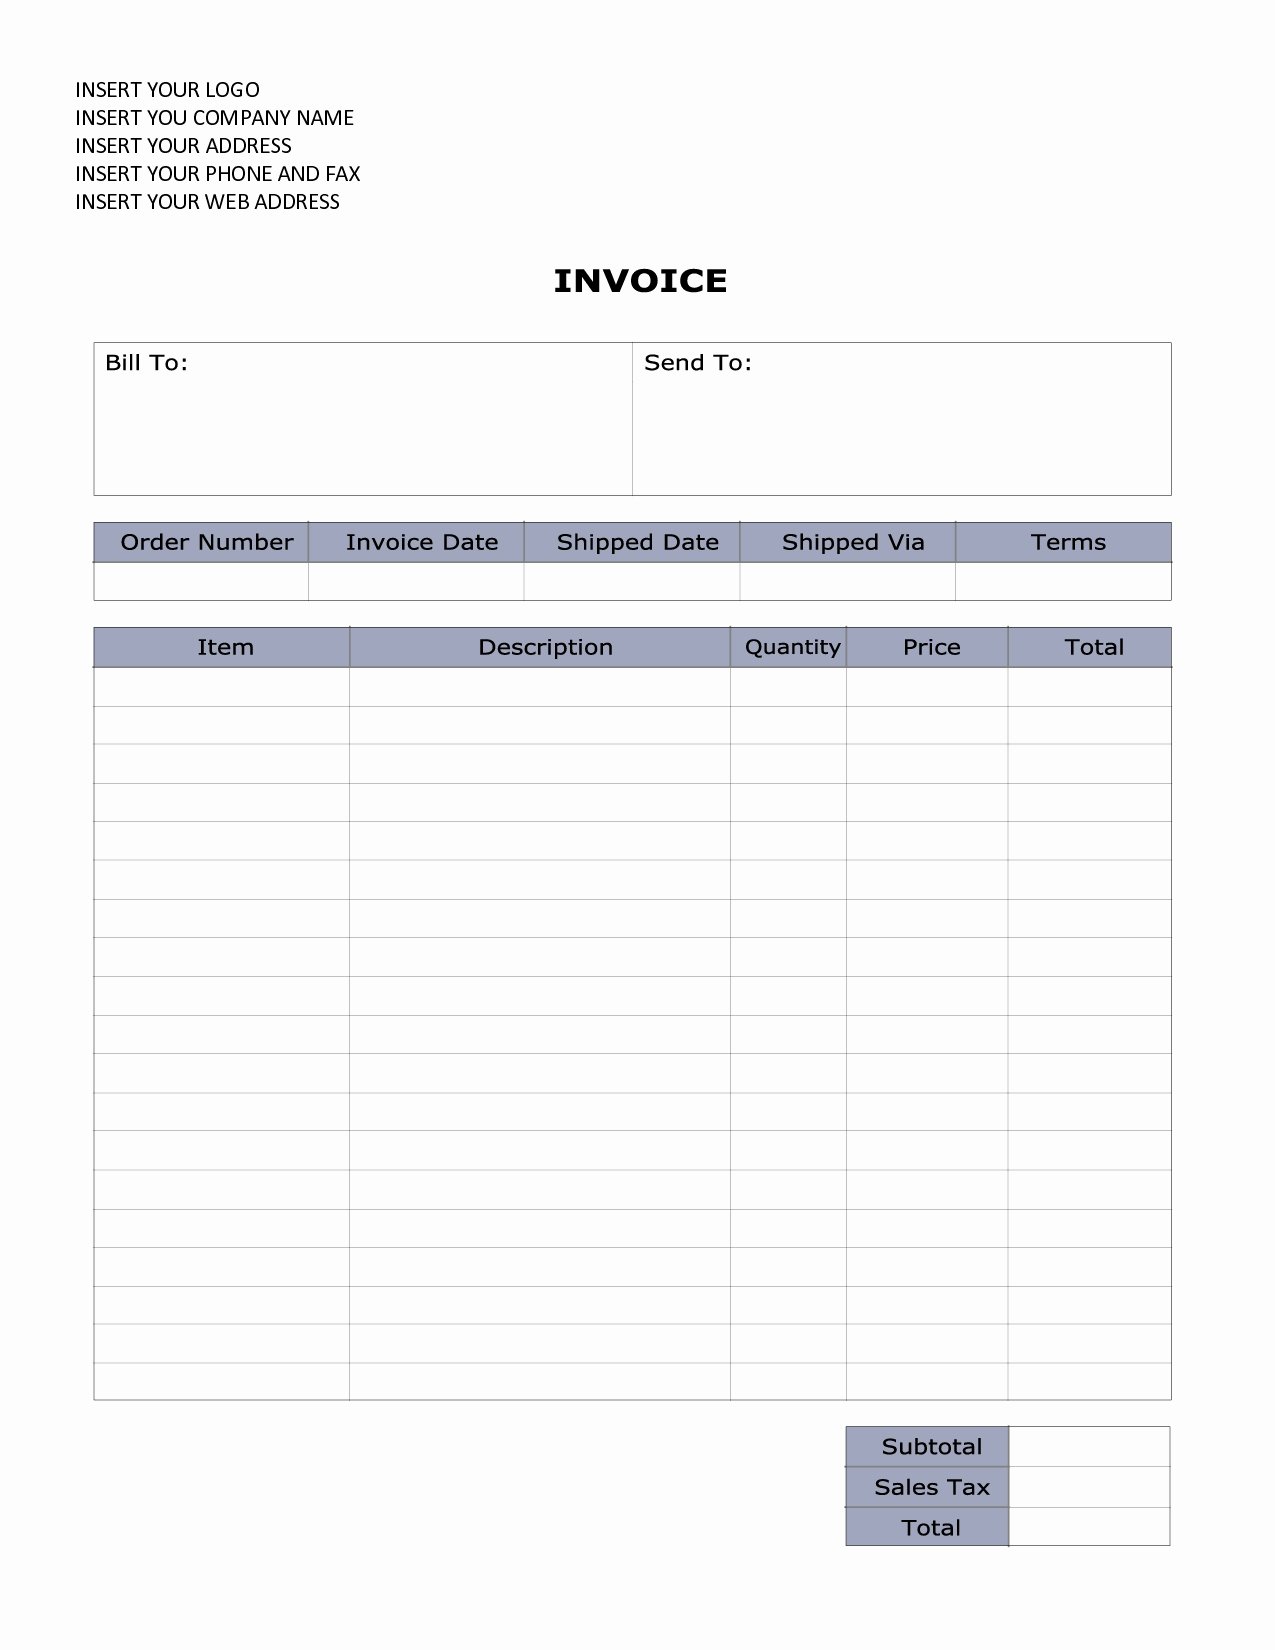 Blank Invoice Template Word Elegant Invoice Template Word Doc